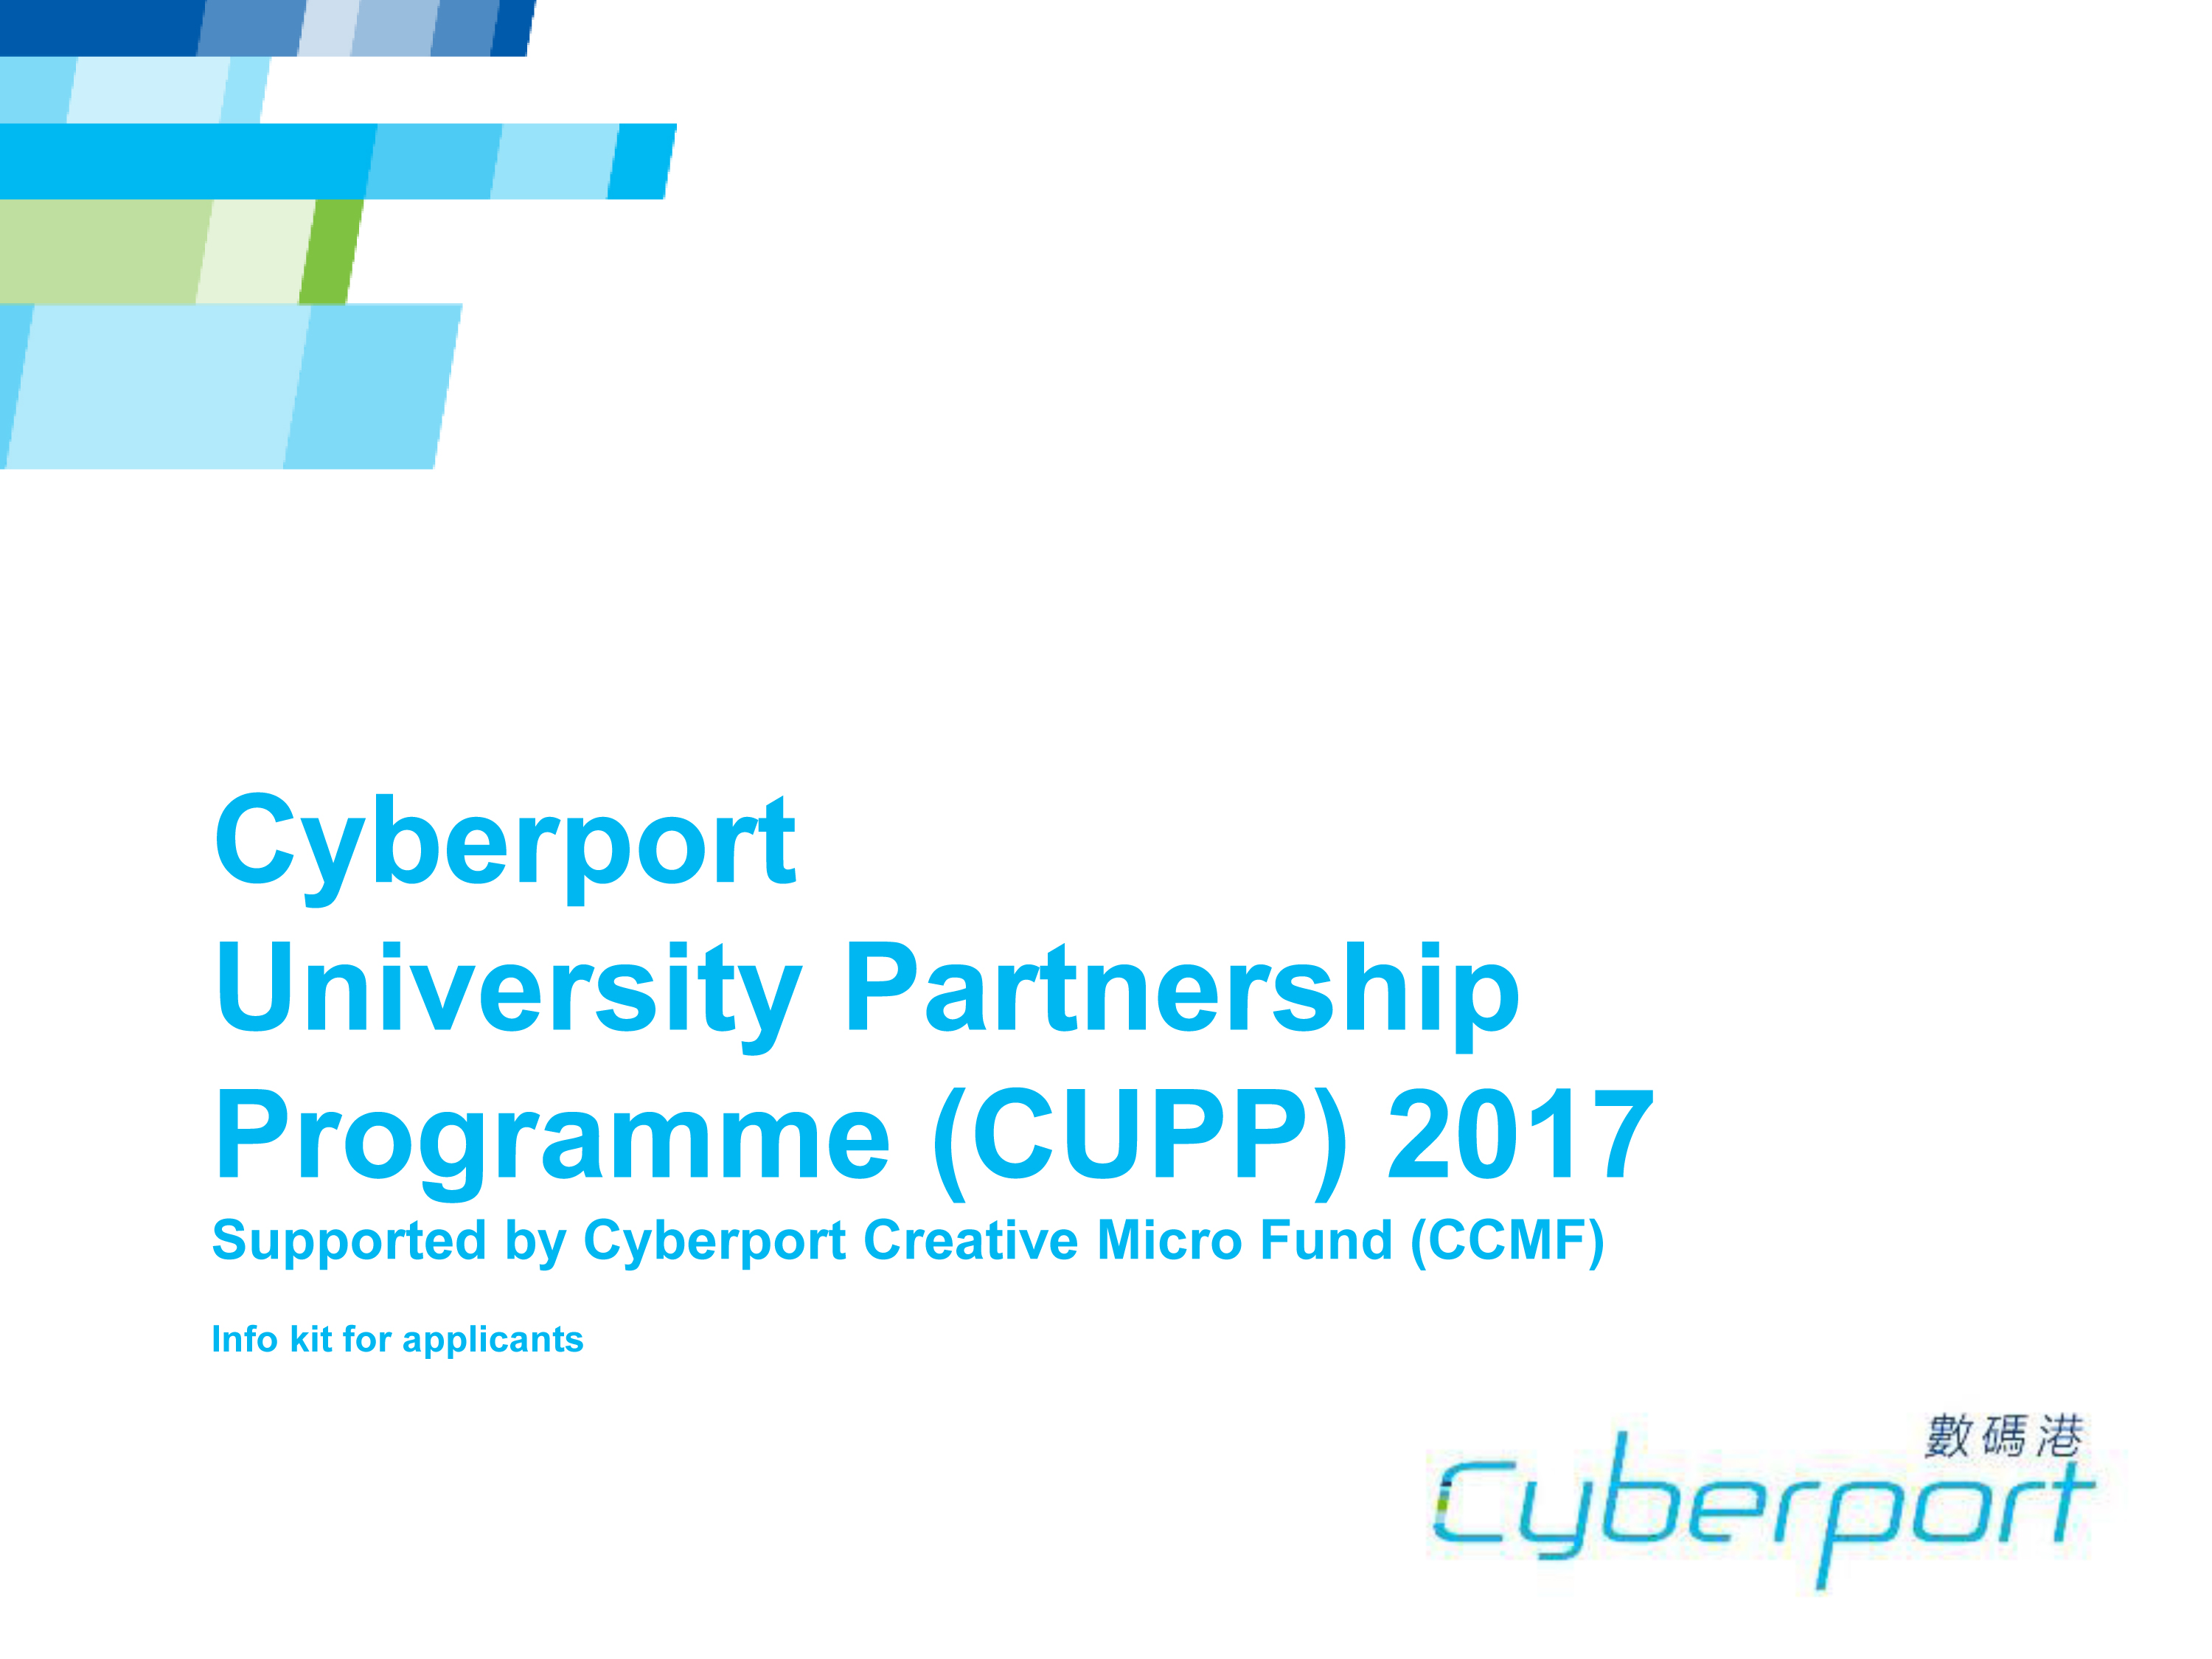 Call for Application : Cyberport University Partnership Programme (CUPP) 2017